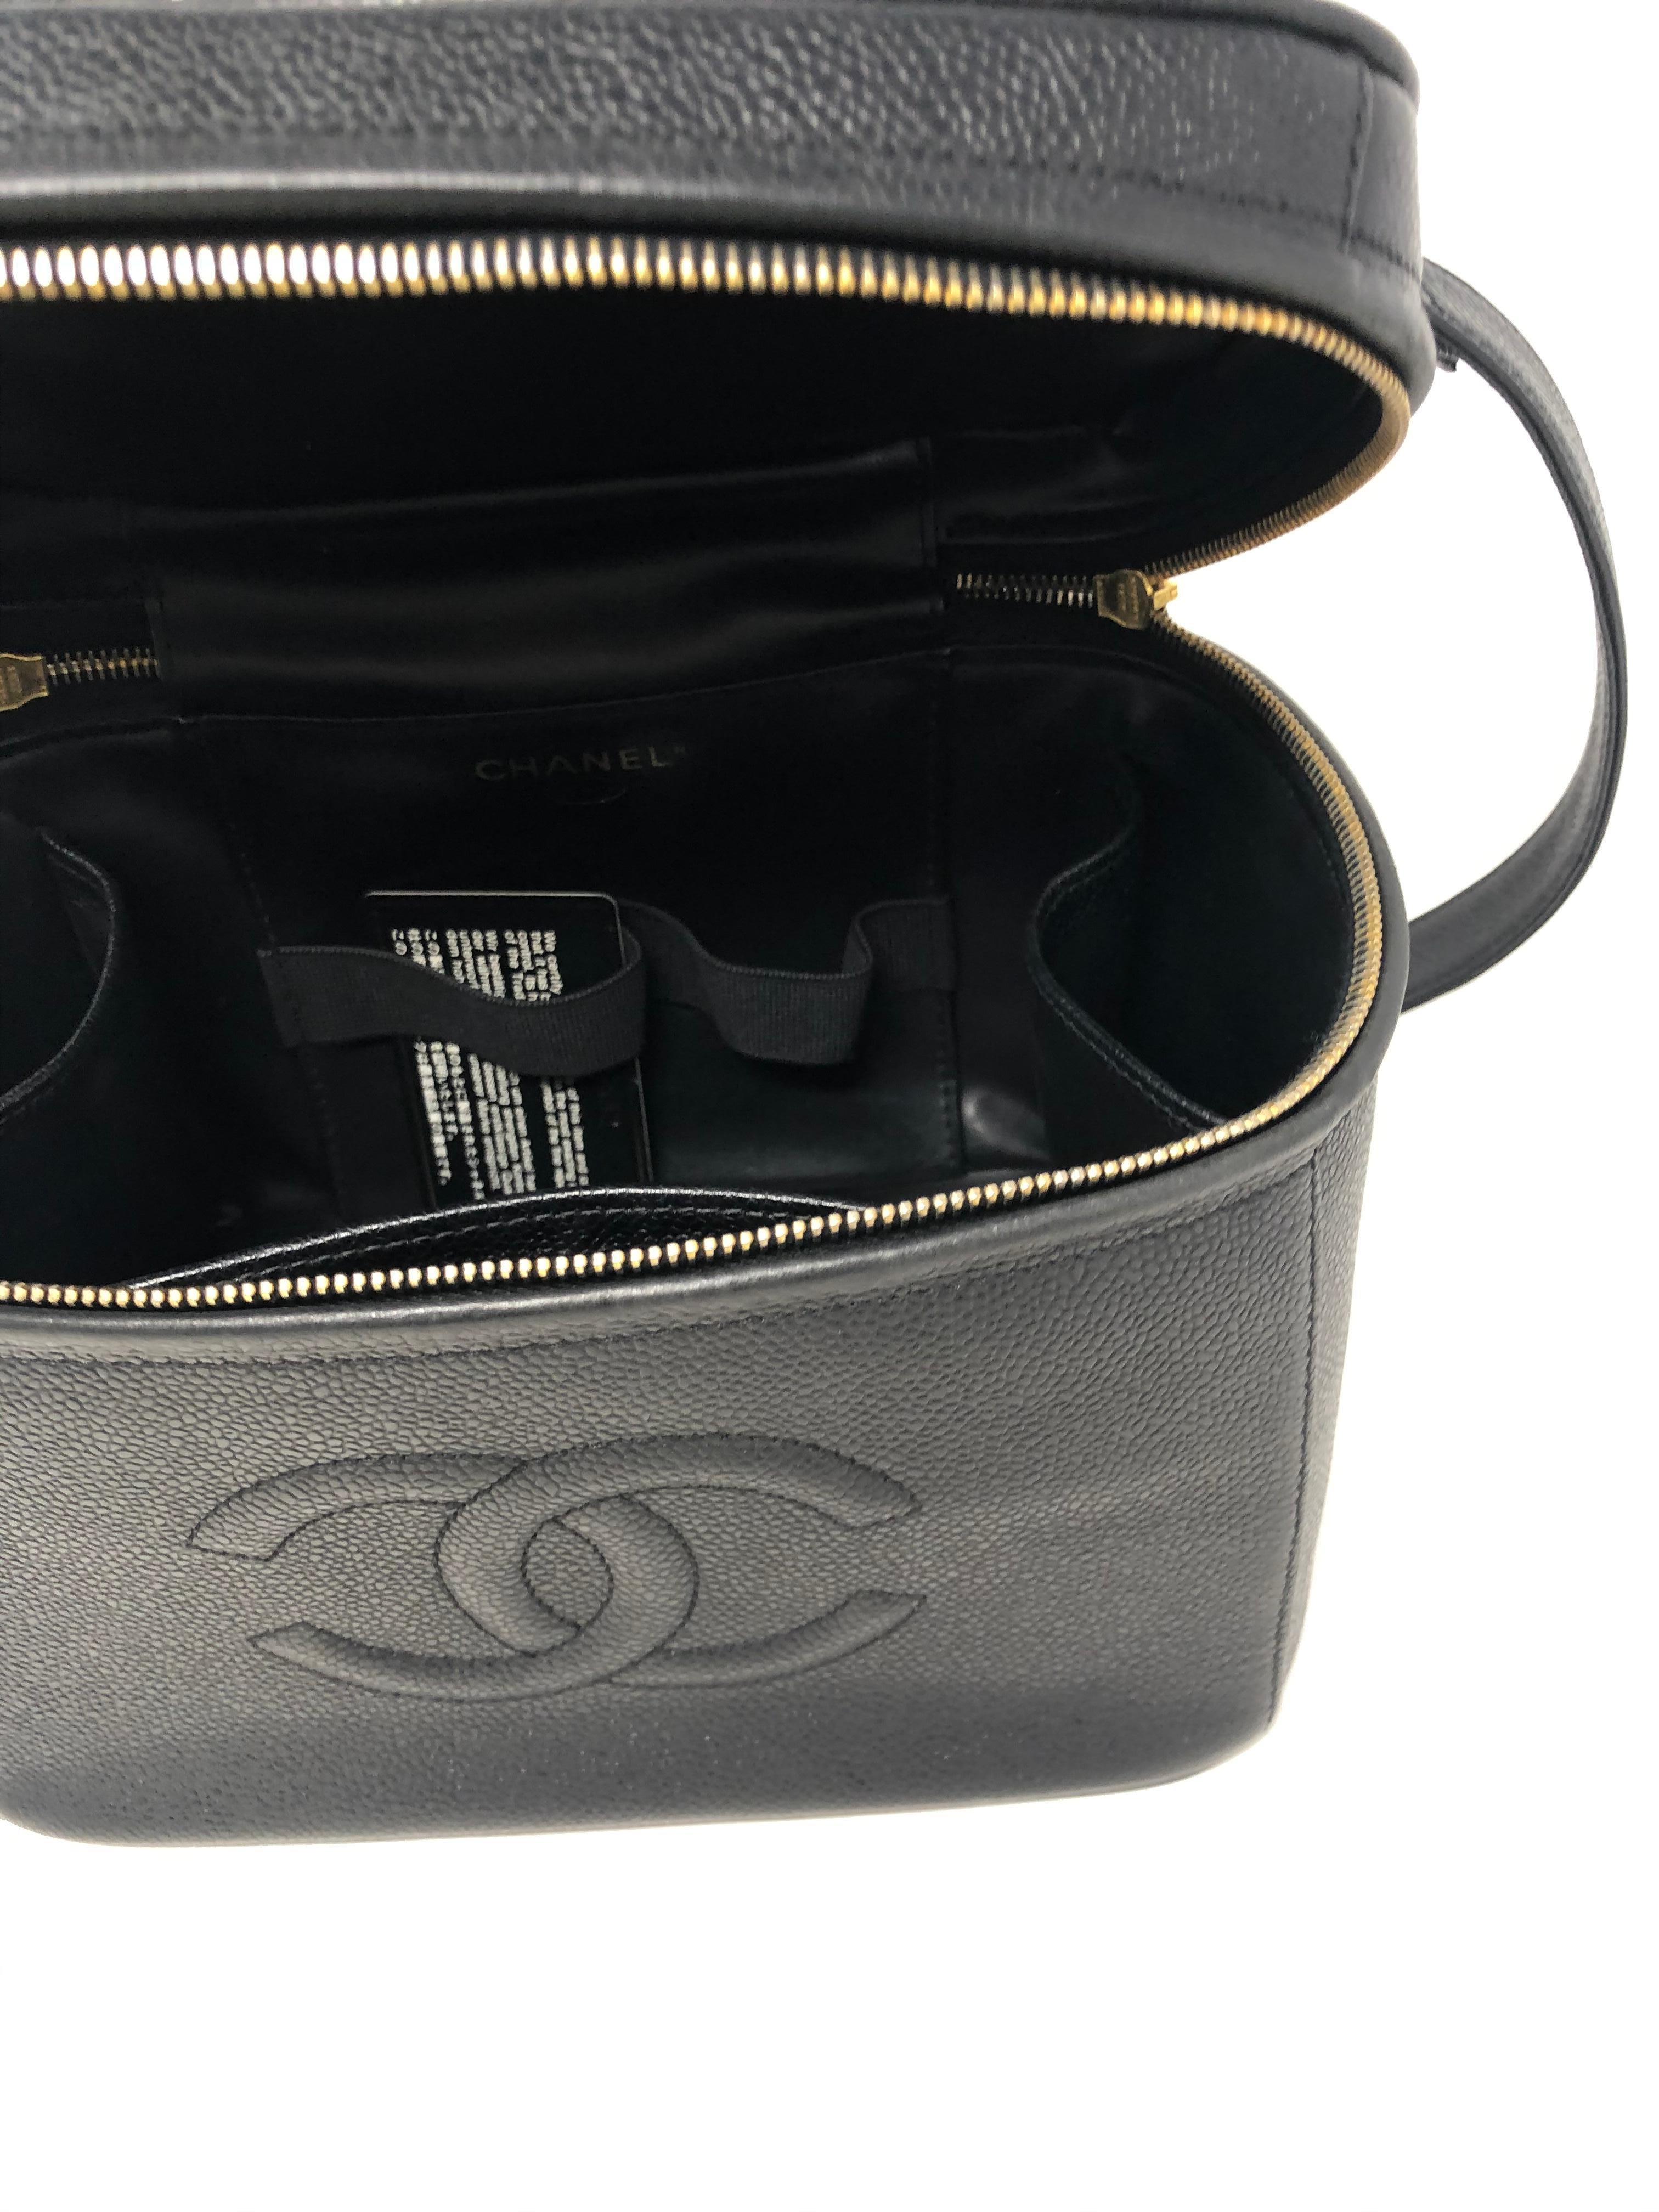 Women's or Men's Chanel Vanity Case With Strap 